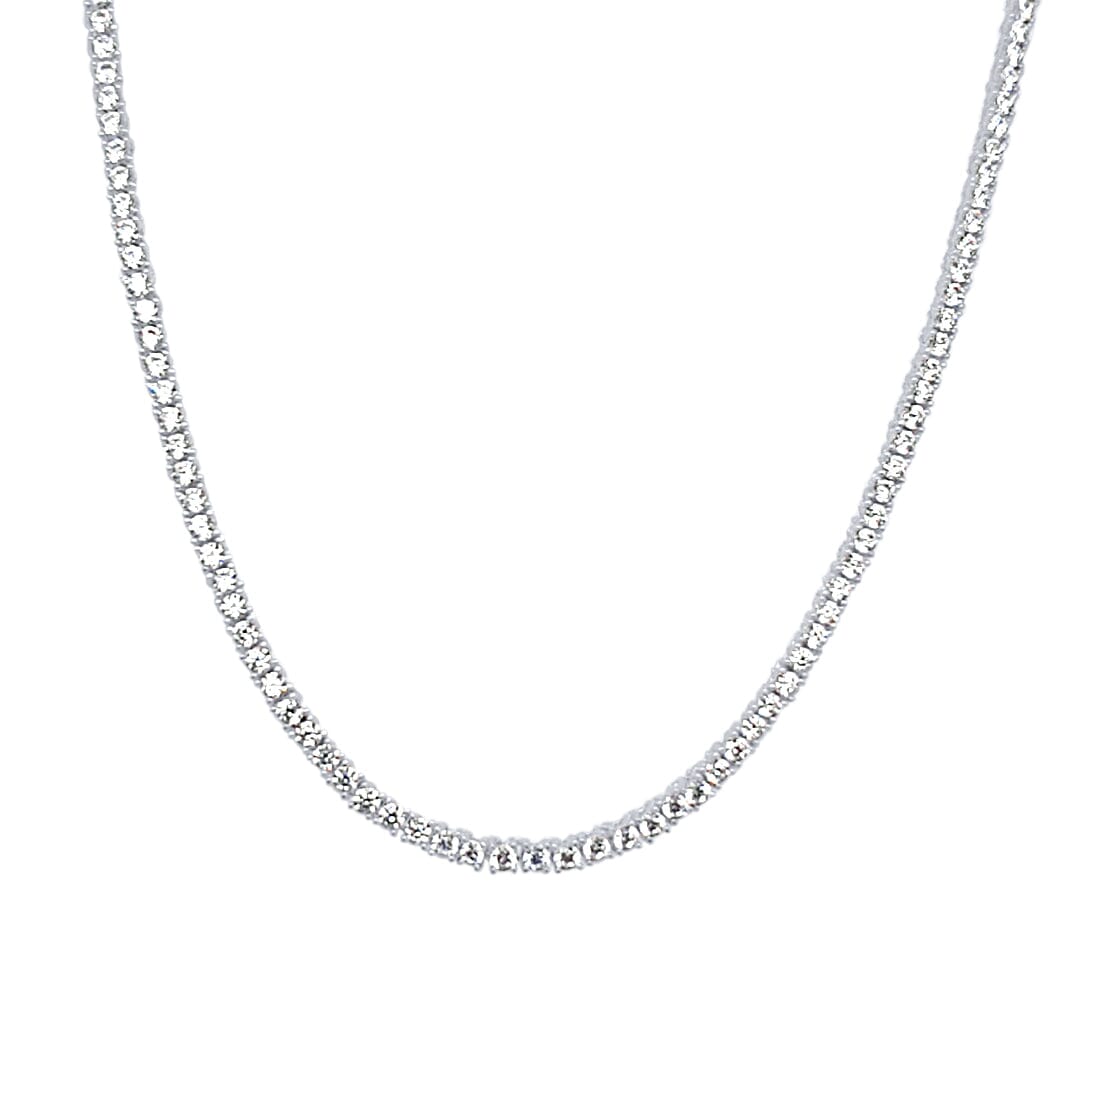 41cm Tennis Necklace with Cubic Zirconia in Sterling Silver Necklaces Bevilles 